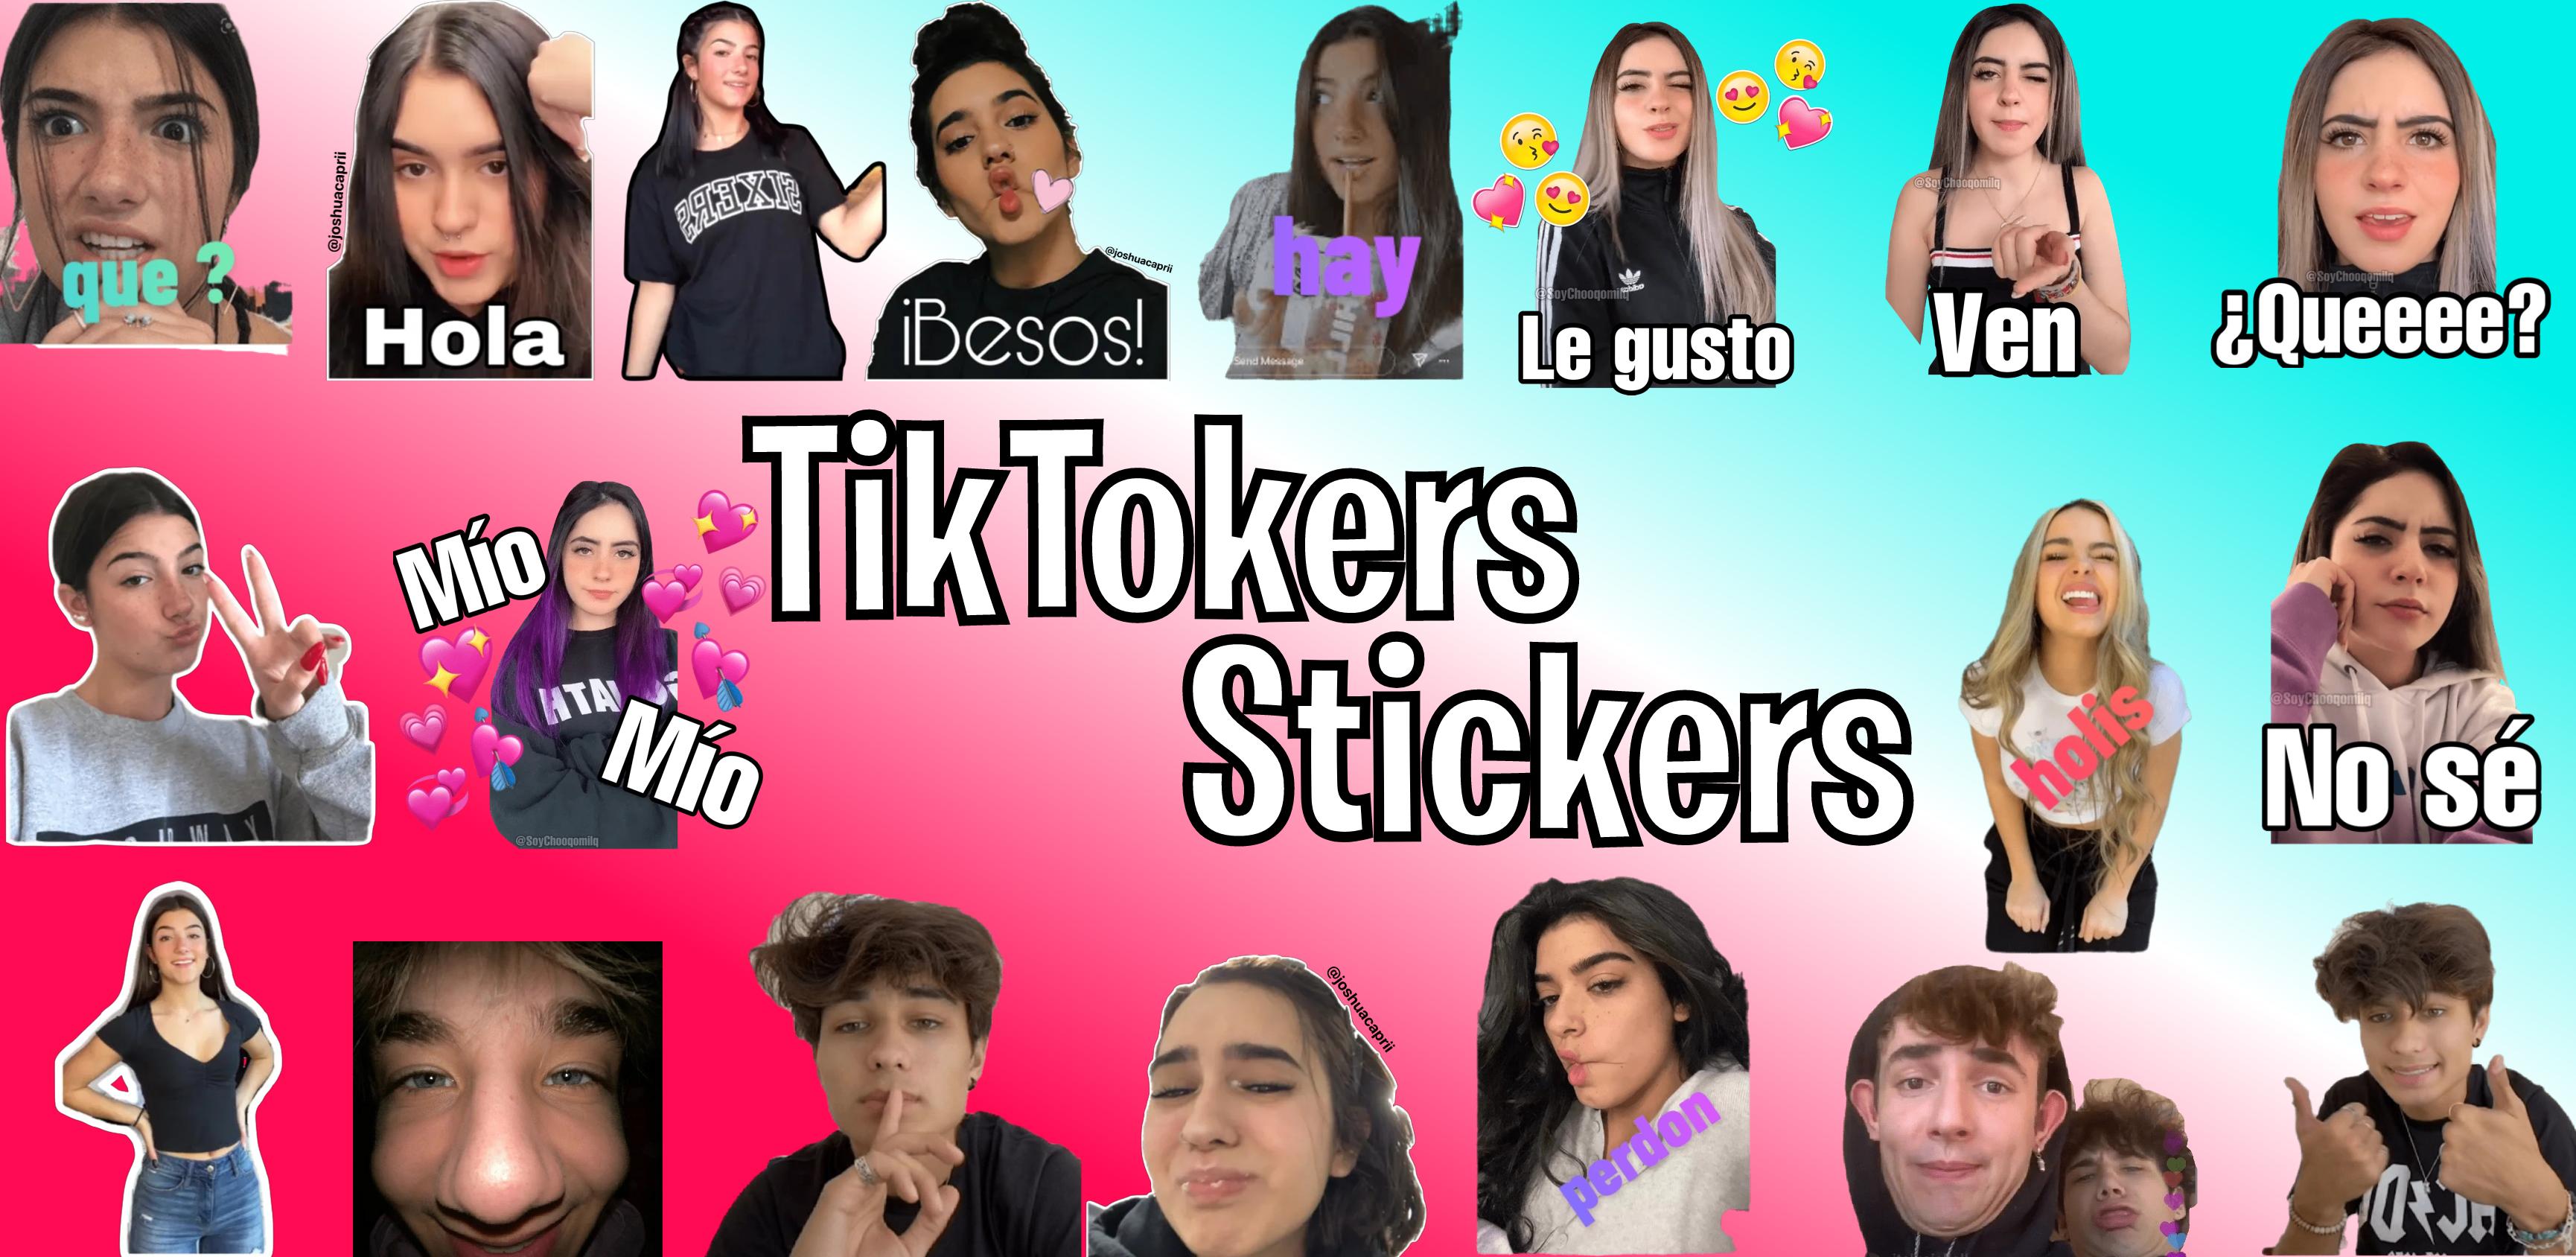 Pictures of famous tiktokers